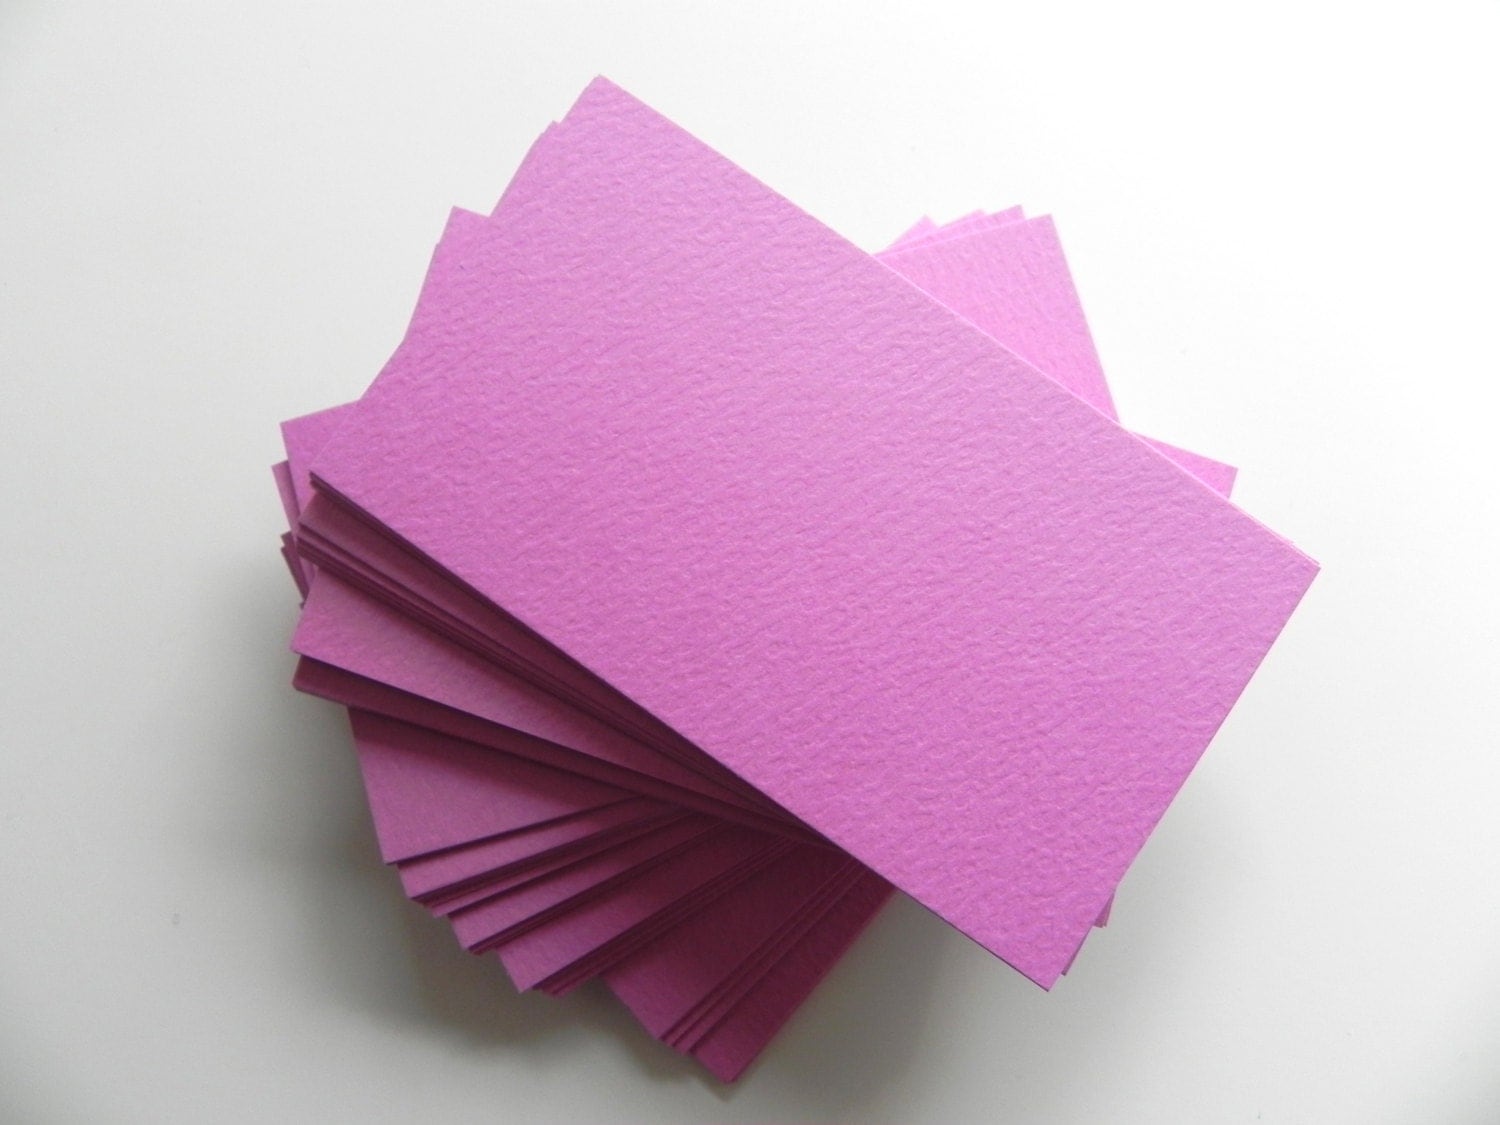 free blank business card templates printable pink outline